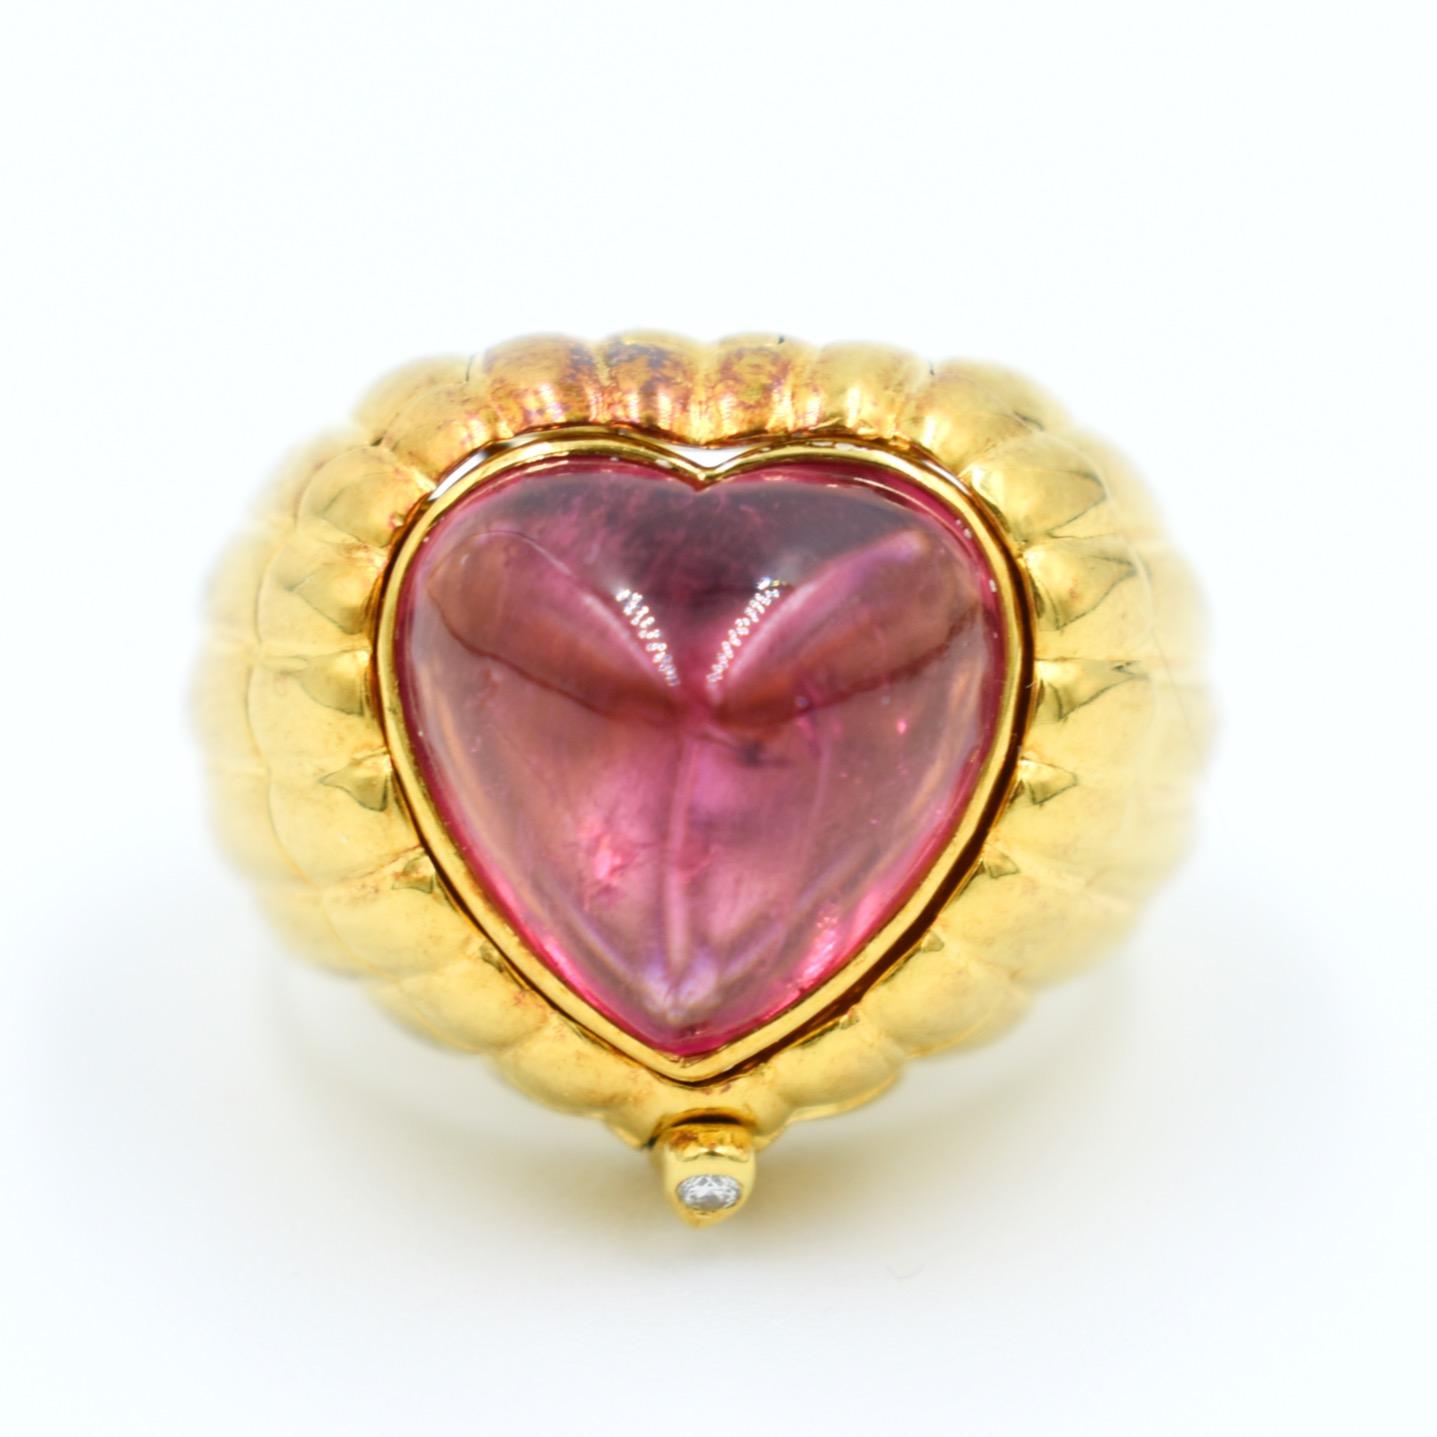 This is a 1994 Simon & Igal designer ring in the shape of a heart. This vintage ring is a true gem with multiple facets, customizable according to your preferences. Made of 18-carat gold, it features three heart-shaped cabochons: a tourmaline, an